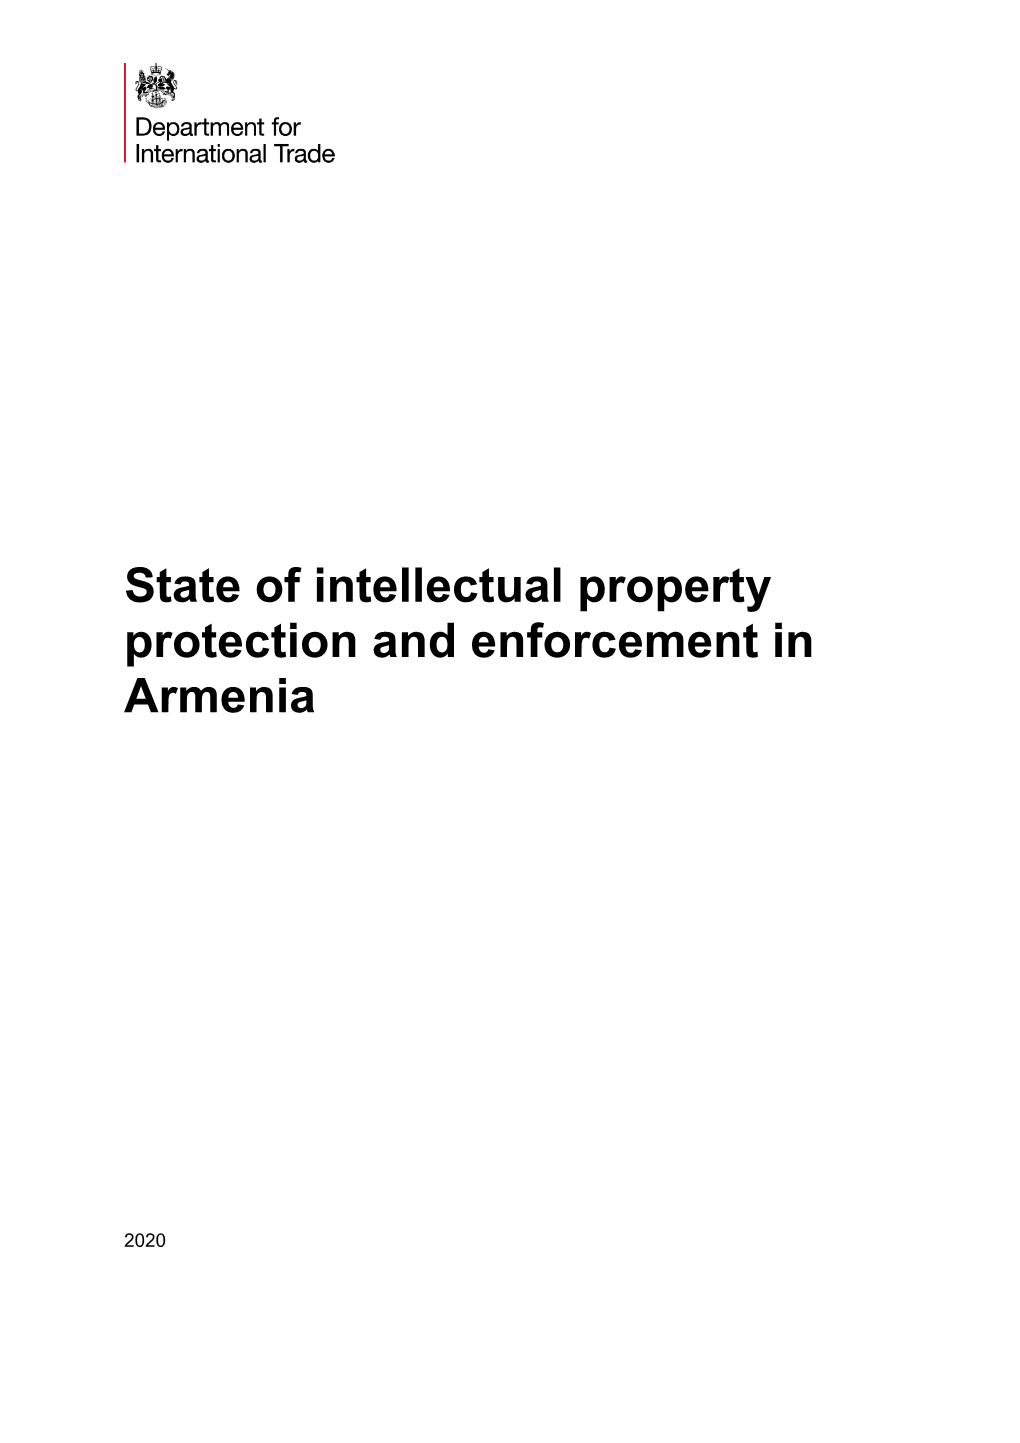 State of Intellectual Property Protection and Enforcement in Armenia